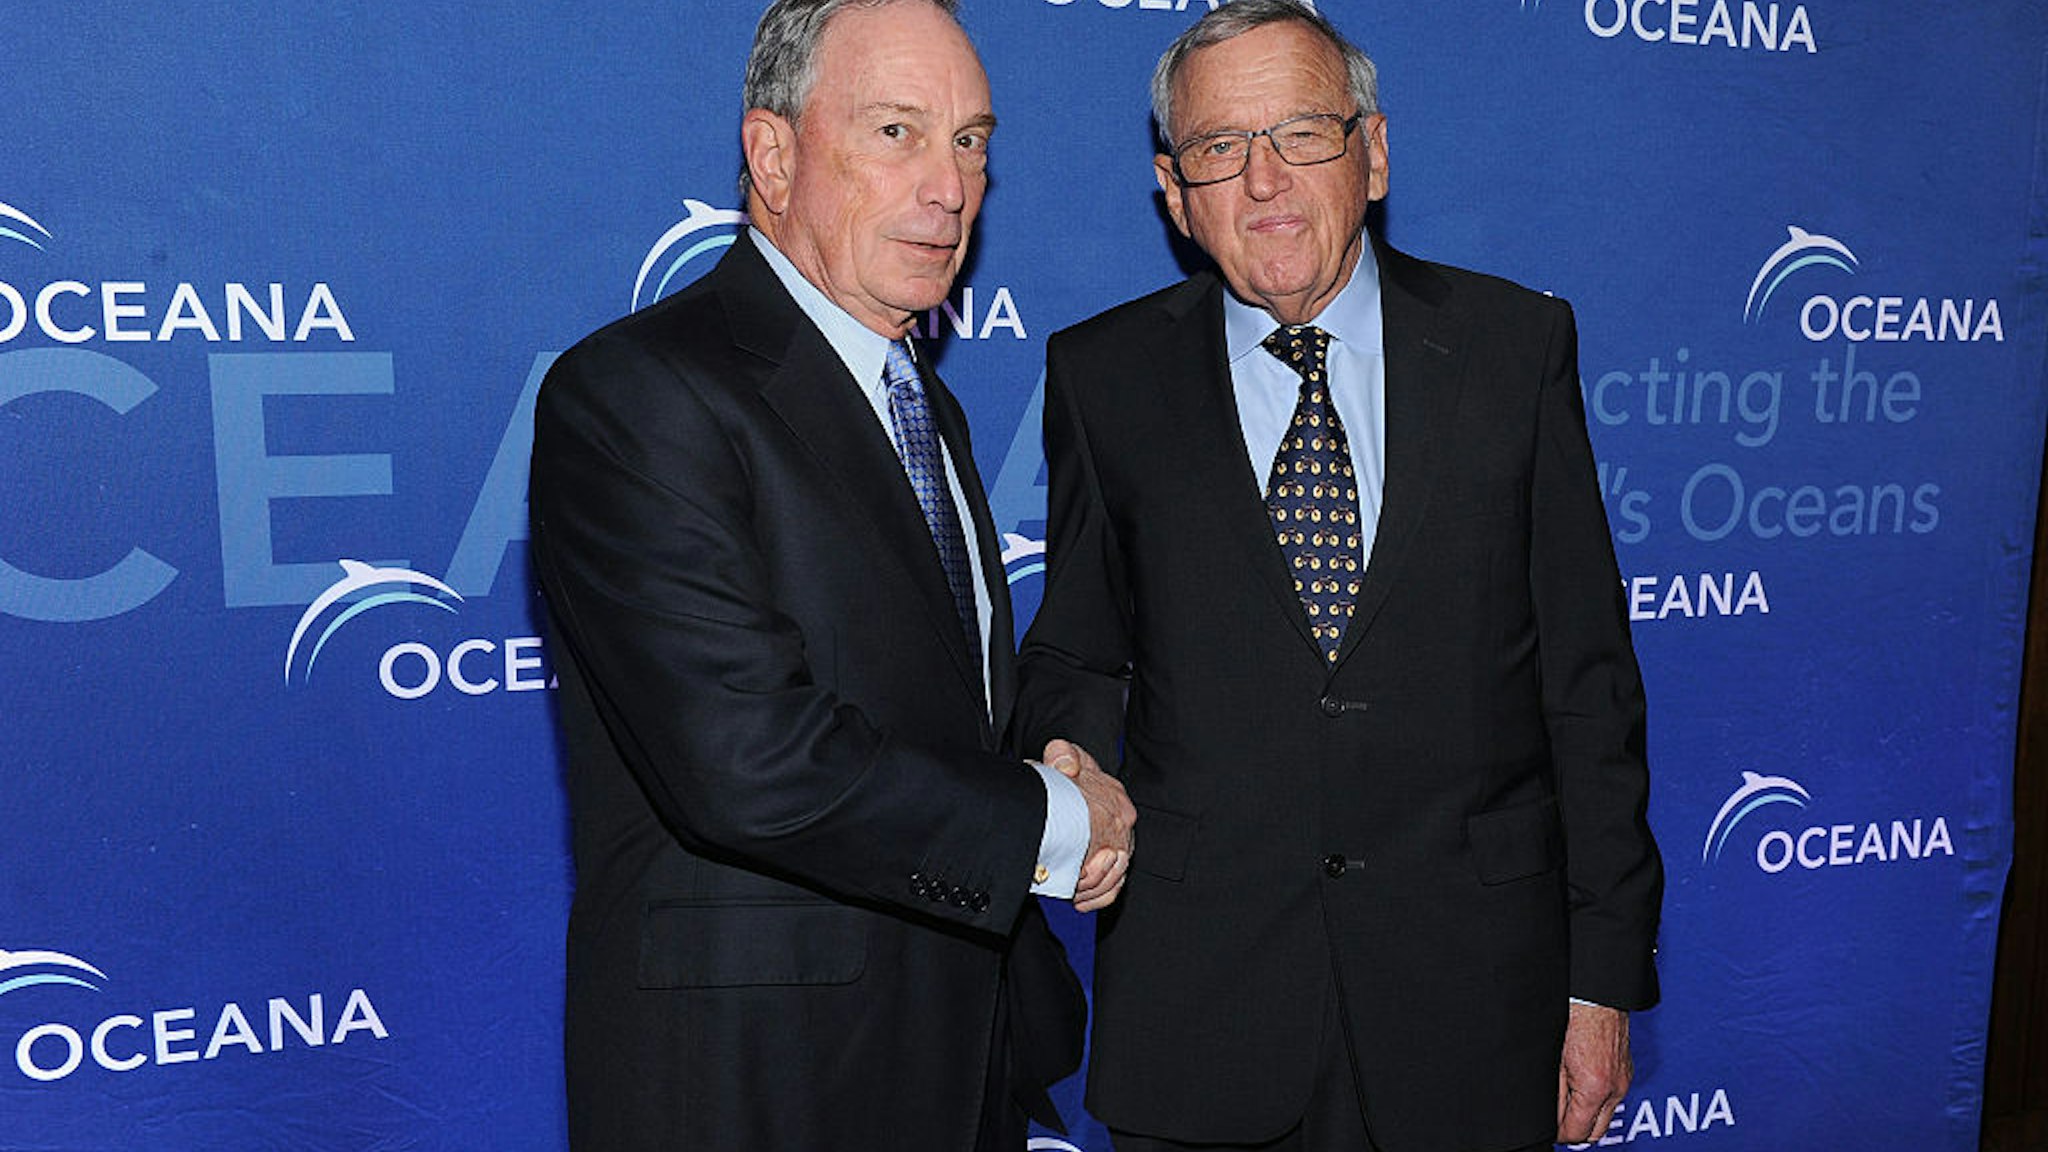 NEW YORK, NY - APRIL 01: Former Mayor of New York City Michael Bloomberg (L) and philanthropist Hansjorg Wyss attend Oceana's 2015 New York City benefit at Four Seasons Restaurant on April 1, 2015 in New York City.